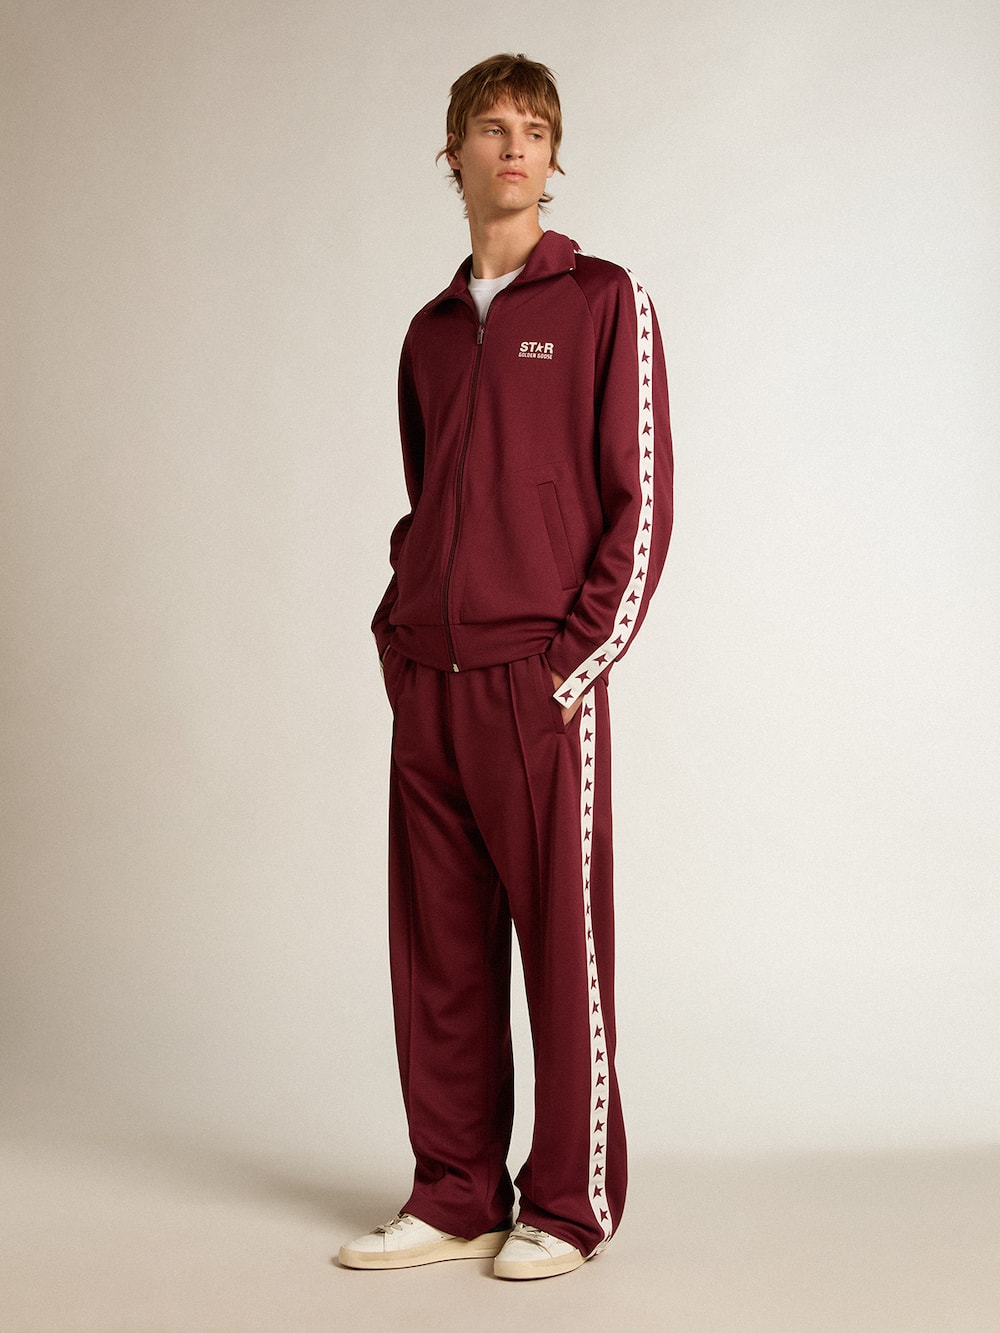 Golden Goose - Men’s burgundy zipped sweatshirt with white strip and contrasting stars in 